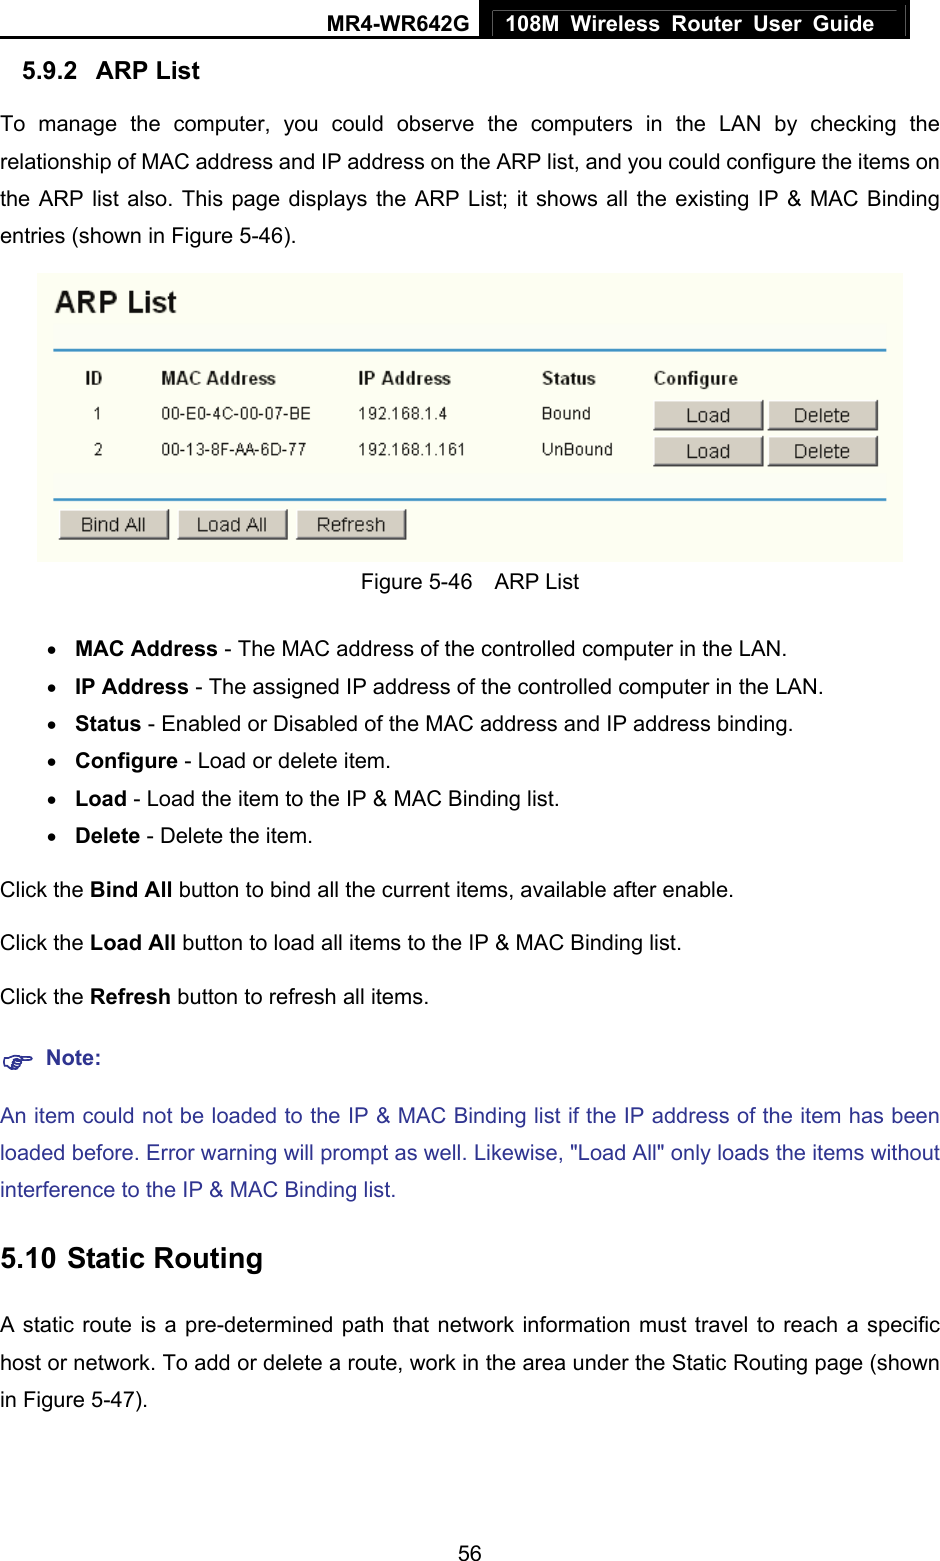 MR4-WR642G 108M Wireless Router User Guide   565.9.2  ARP List To manage the computer, you could observe the computers in the LAN by checking the relationship of MAC address and IP address on the ARP list, and you could configure the items on the ARP list also. This page displays the ARP List; it shows all the existing IP &amp; MAC Binding entries (shown in Figure 5-46).    Figure 5-46  ARP List • MAC Address - The MAC address of the controlled computer in the LAN.   • IP Address - The assigned IP address of the controlled computer in the LAN.   • Status - Enabled or Disabled of the MAC address and IP address binding.   • Configure - Load or delete item.   • Load - Load the item to the IP &amp; MAC Binding list.   • Delete - Delete the item.   Click the Bind All button to bind all the current items, available after enable. Click the Load All button to load all items to the IP &amp; MAC Binding list. Click the Refresh button to refresh all items. ) Note: An item could not be loaded to the IP &amp; MAC Binding list if the IP address of the item has been loaded before. Error warning will prompt as well. Likewise, &quot;Load All&quot; only loads the items without interference to the IP &amp; MAC Binding list. 5.10 Static Routing A static route is a pre-determined path that network information must travel to reach a specific host or network. To add or delete a route, work in the area under the Static Routing page (shown in Figure 5-47). 